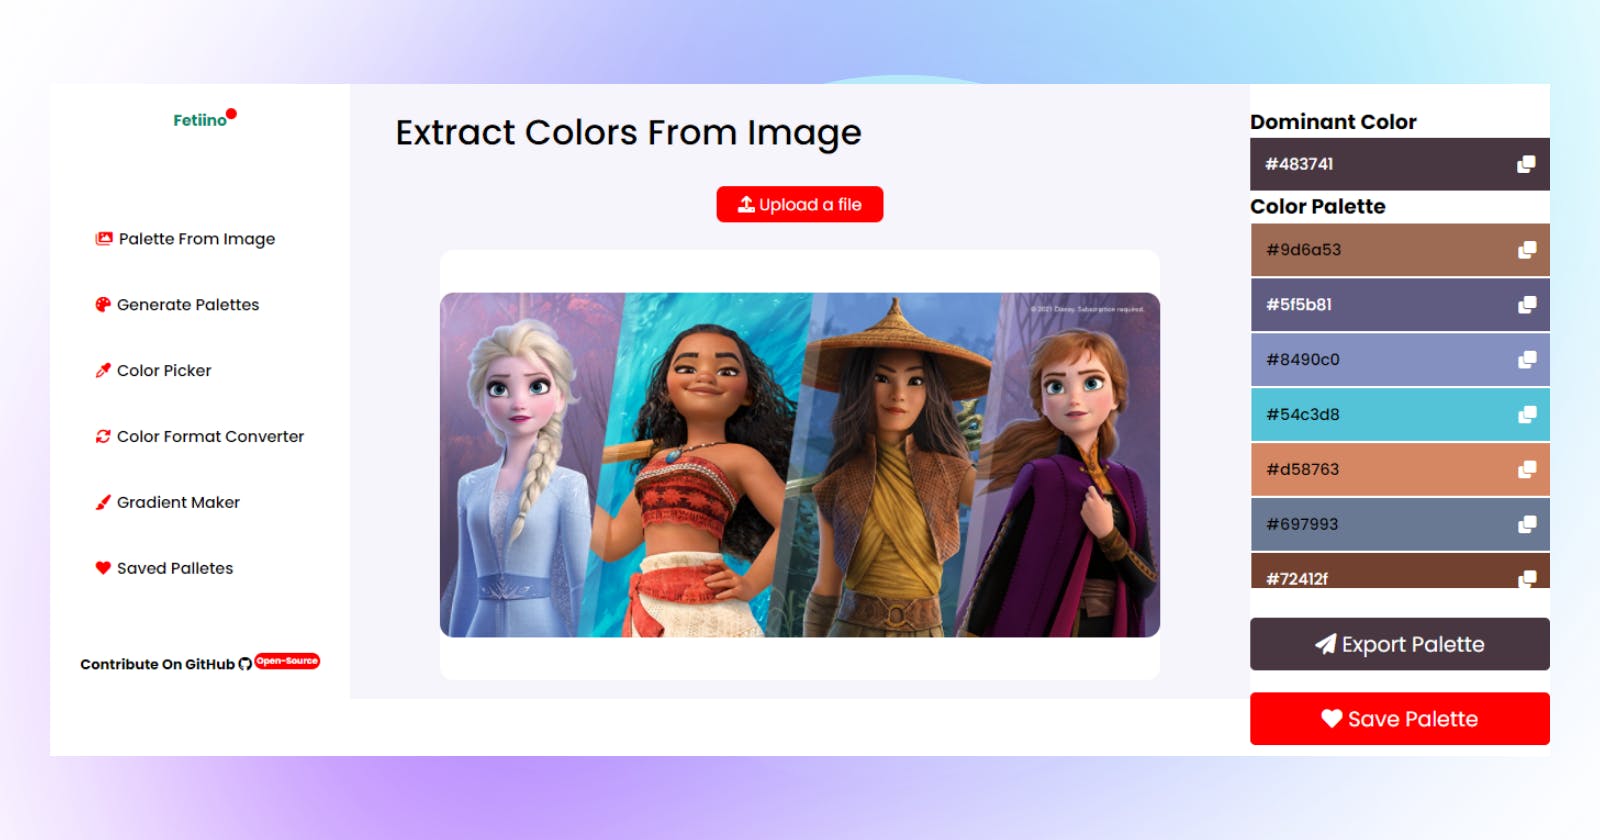 Introducing Fetiino - Extract color palettes from images and do more with colors.